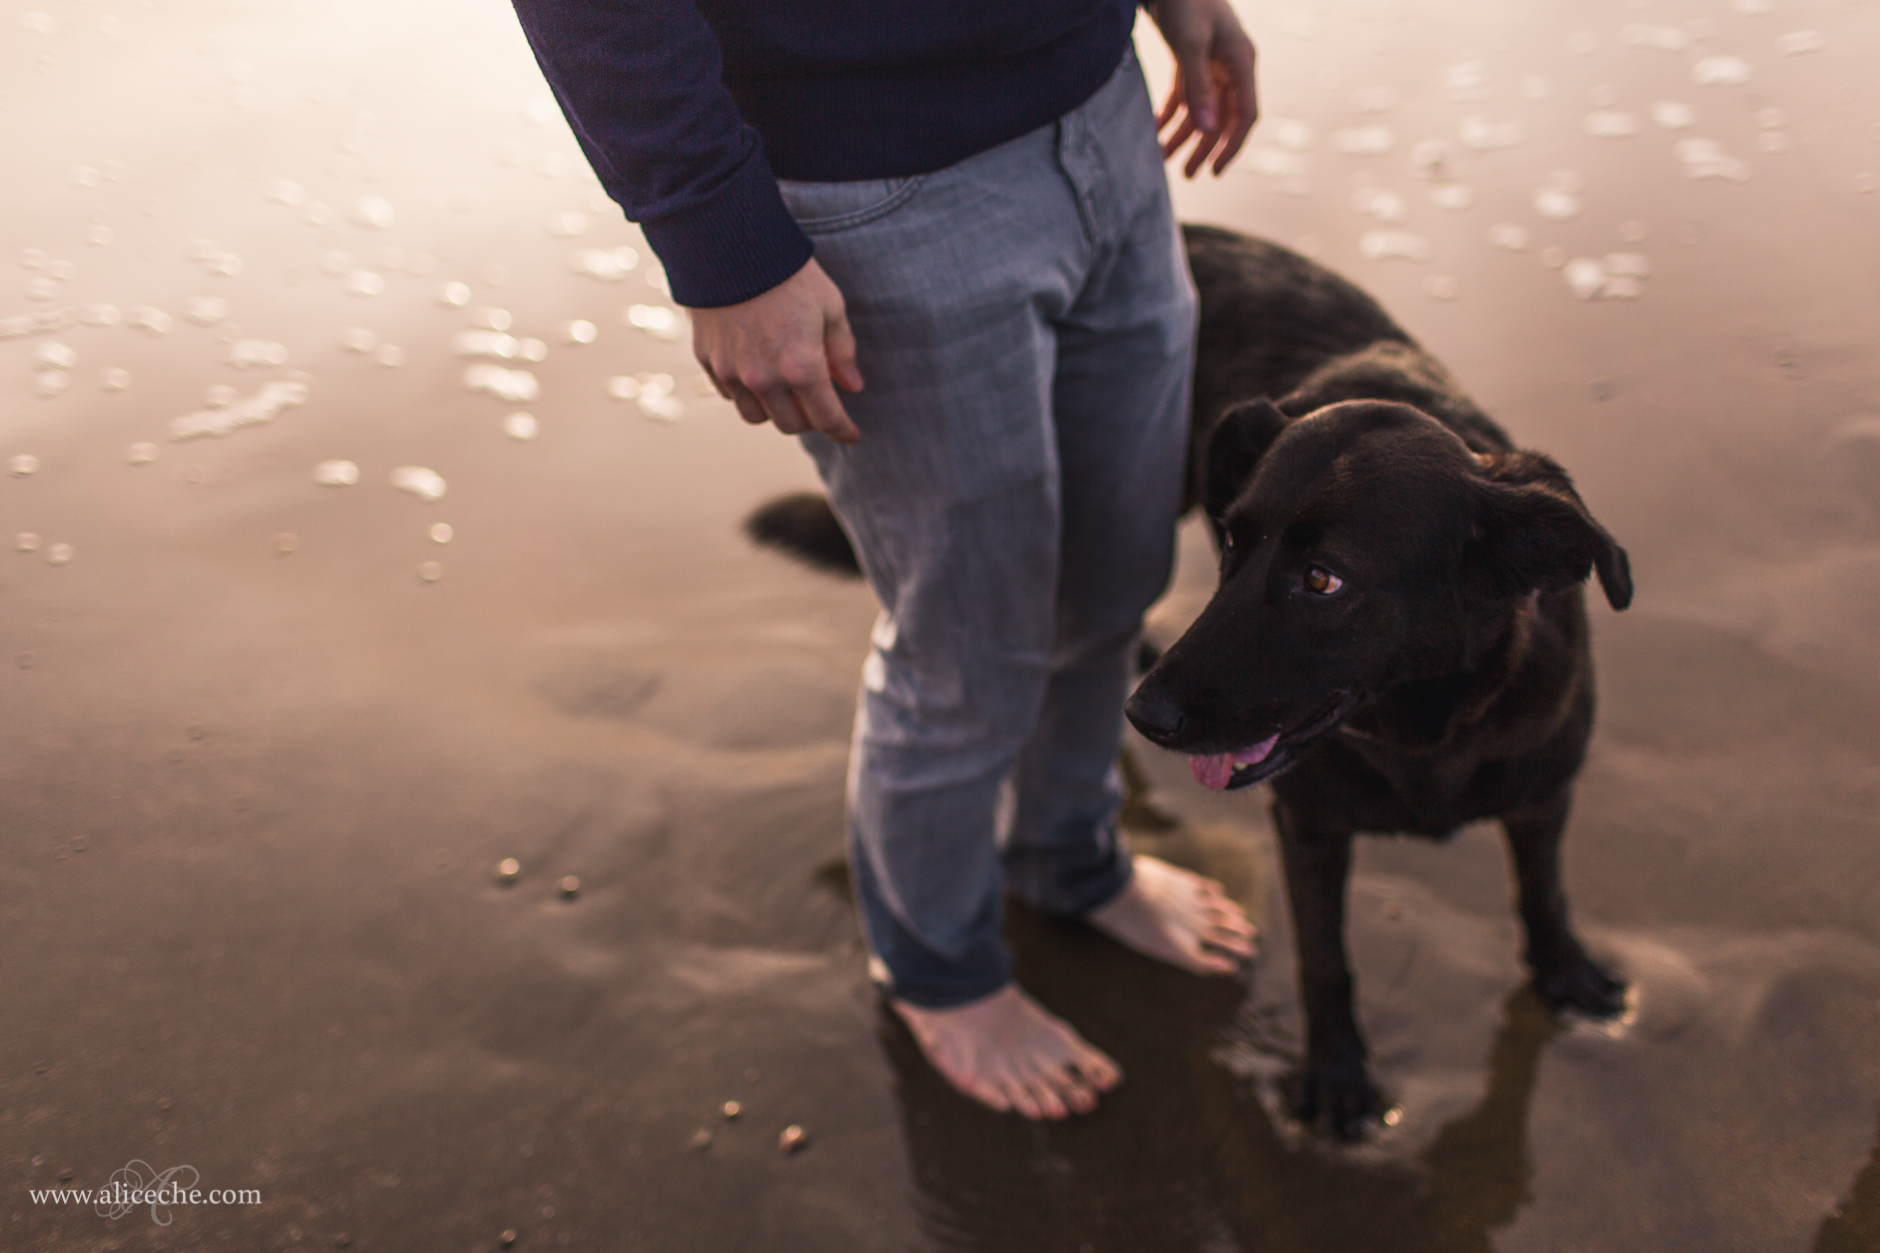 alice-che-photography-man-on-beach-with-dog-san-francisco-engagement